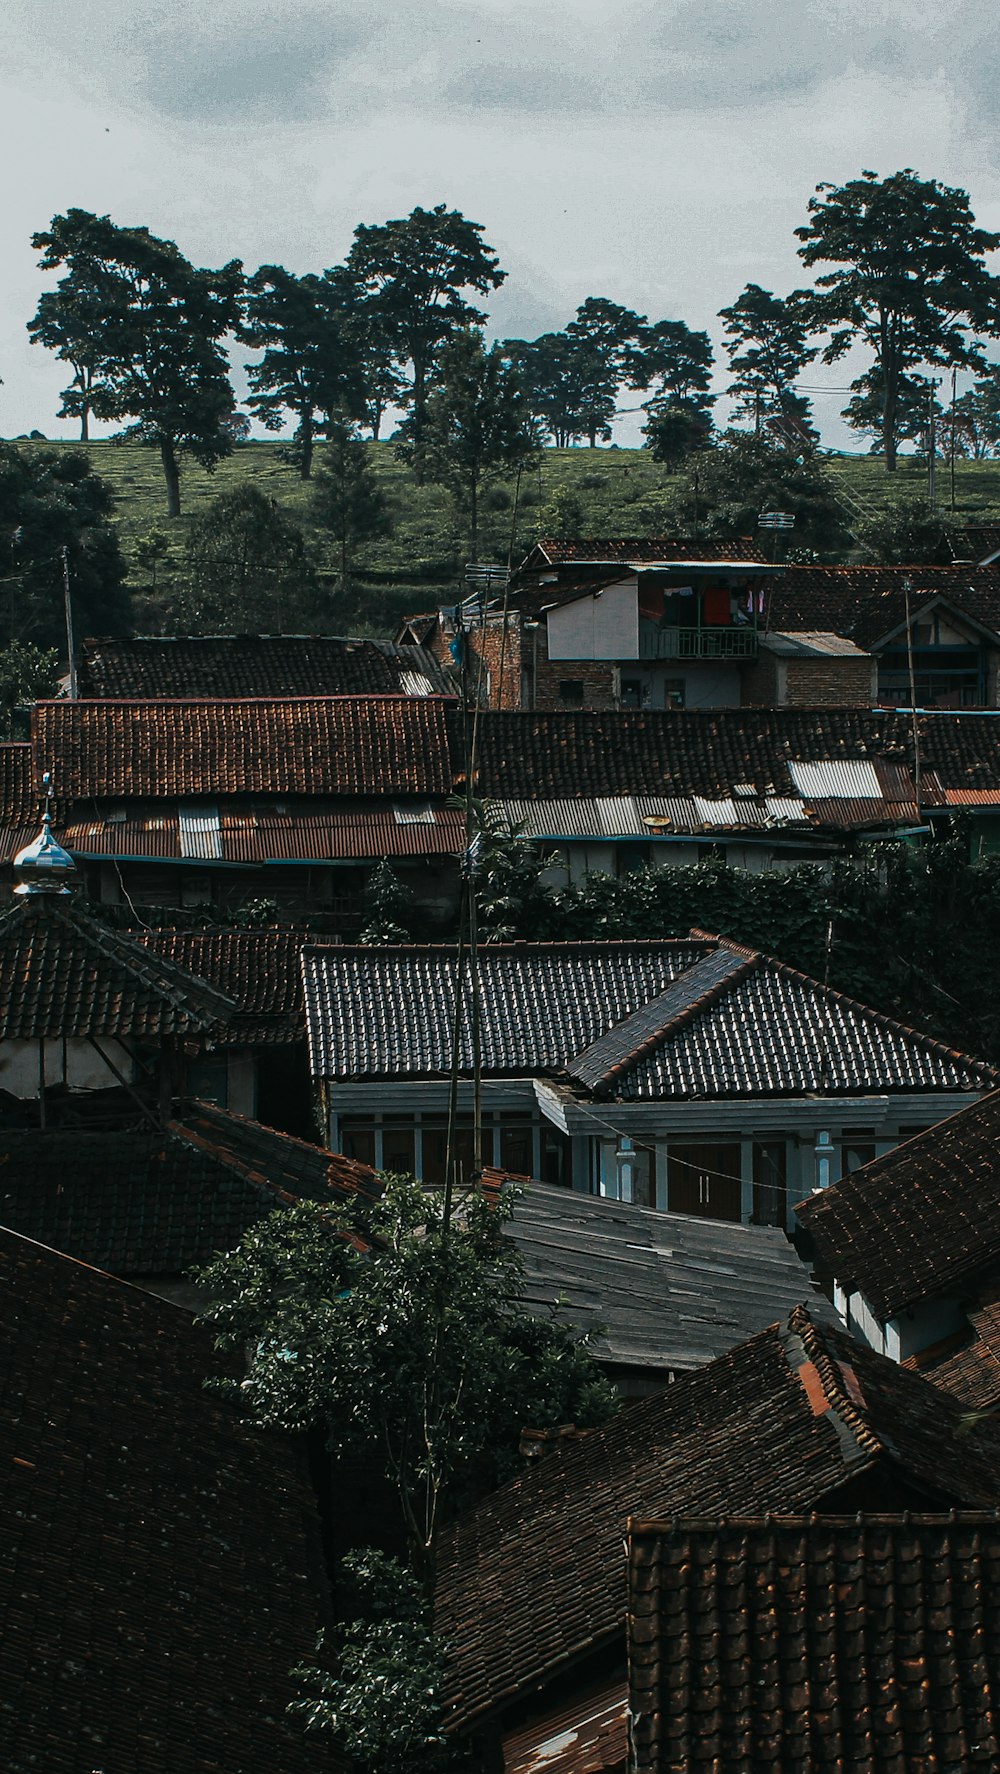 a view of a city with rooftops and trees